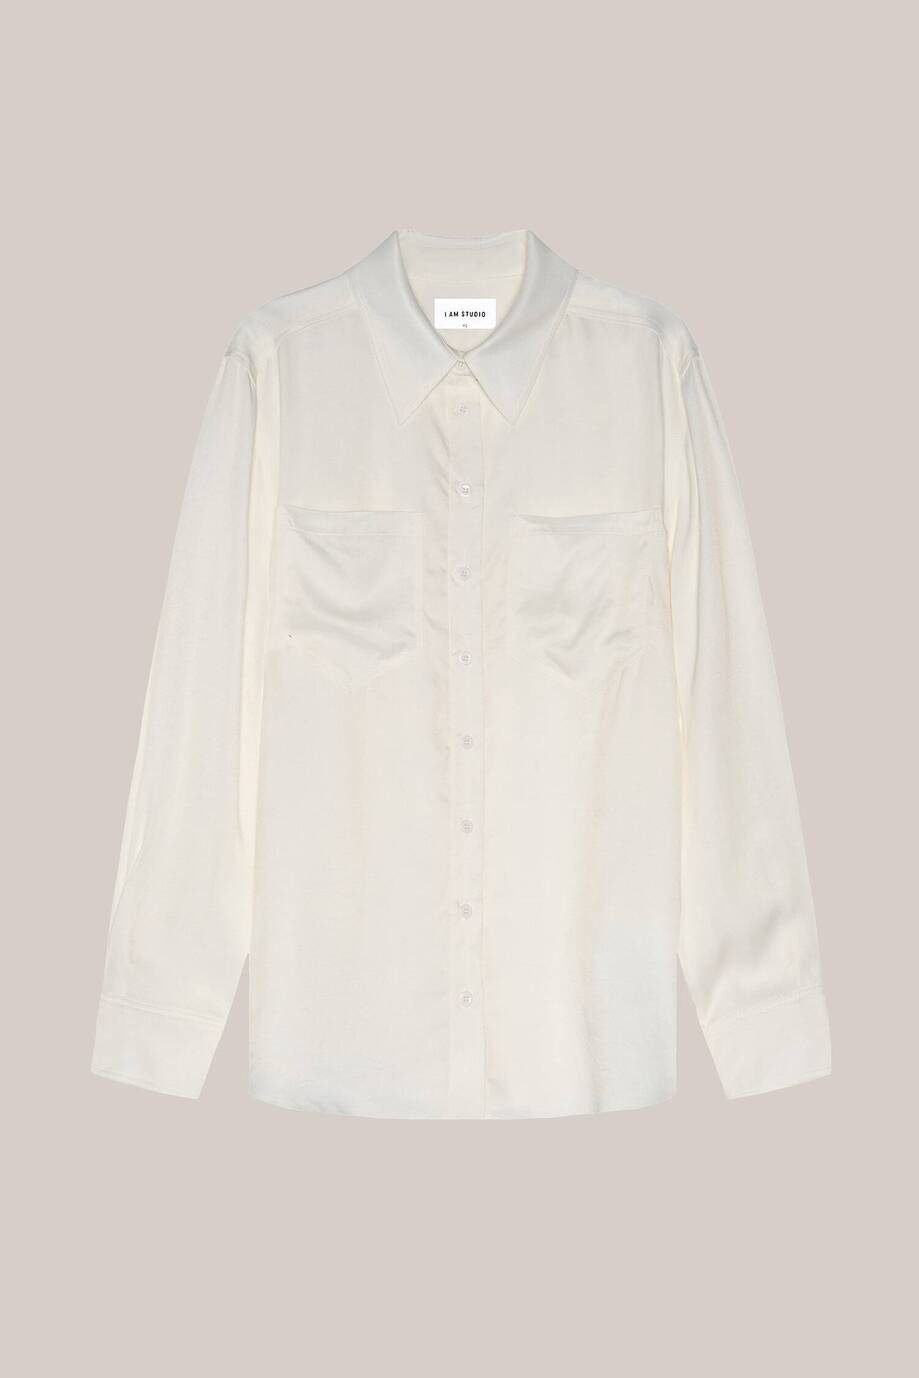 Men's-cut shirt with chest pockets 